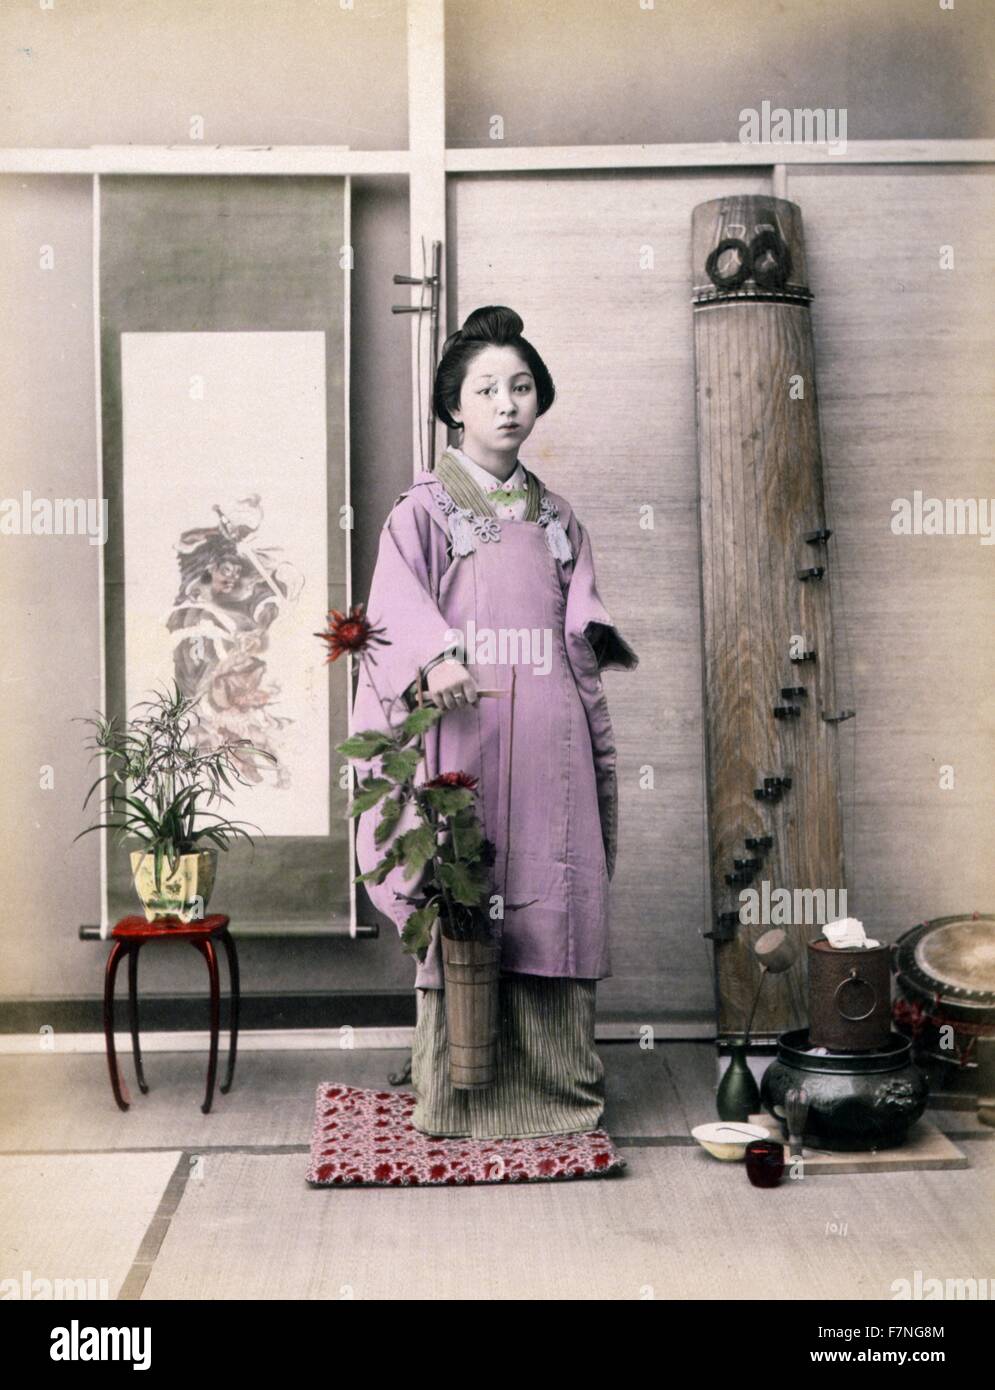 Photograph shows a portrait of a young woman, full-length, standing, facing front, holding a small, long-handled bucket with flowers in it. There is a small table with potted plant in front of a hanging scroll in the background on the left, and a Japanese zither leaning against the wall on the right. Watercolour drawings on the mount depict a Japanese red-crowned crane in flight with Mount Fuji in the background in the upper right and two cranes in the lower left. Stock Photo